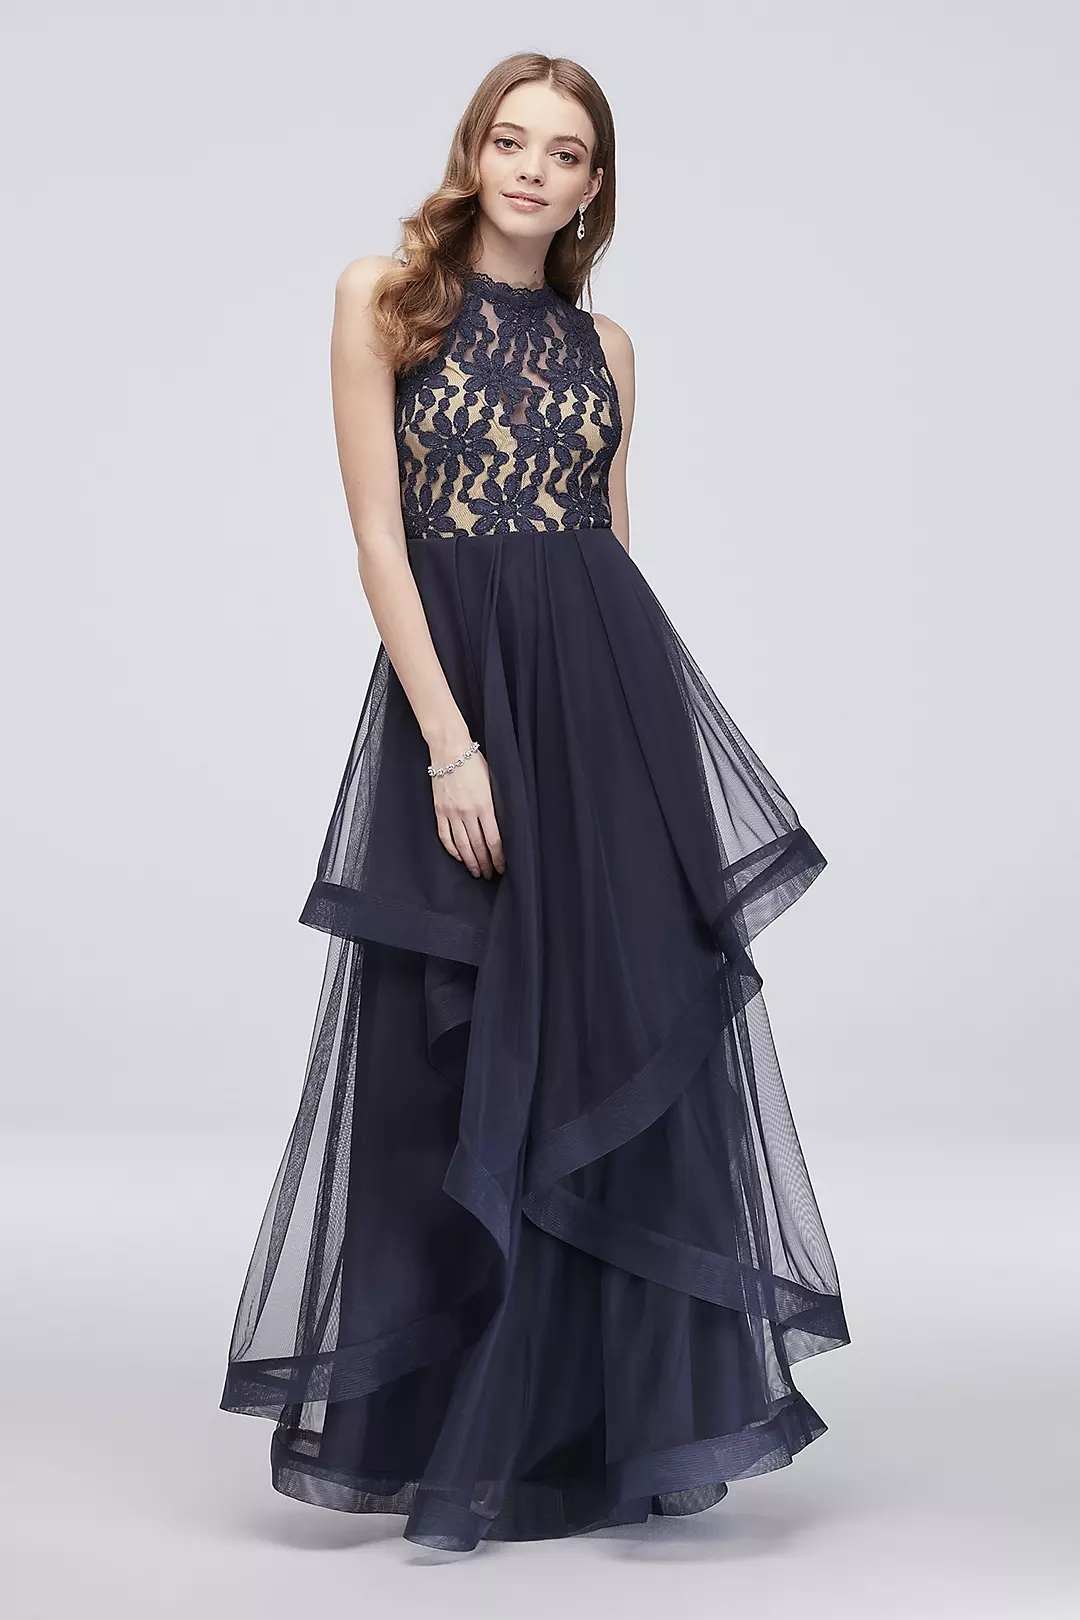 Cascading Glitter Lace Dress with Horsehair Trim Image